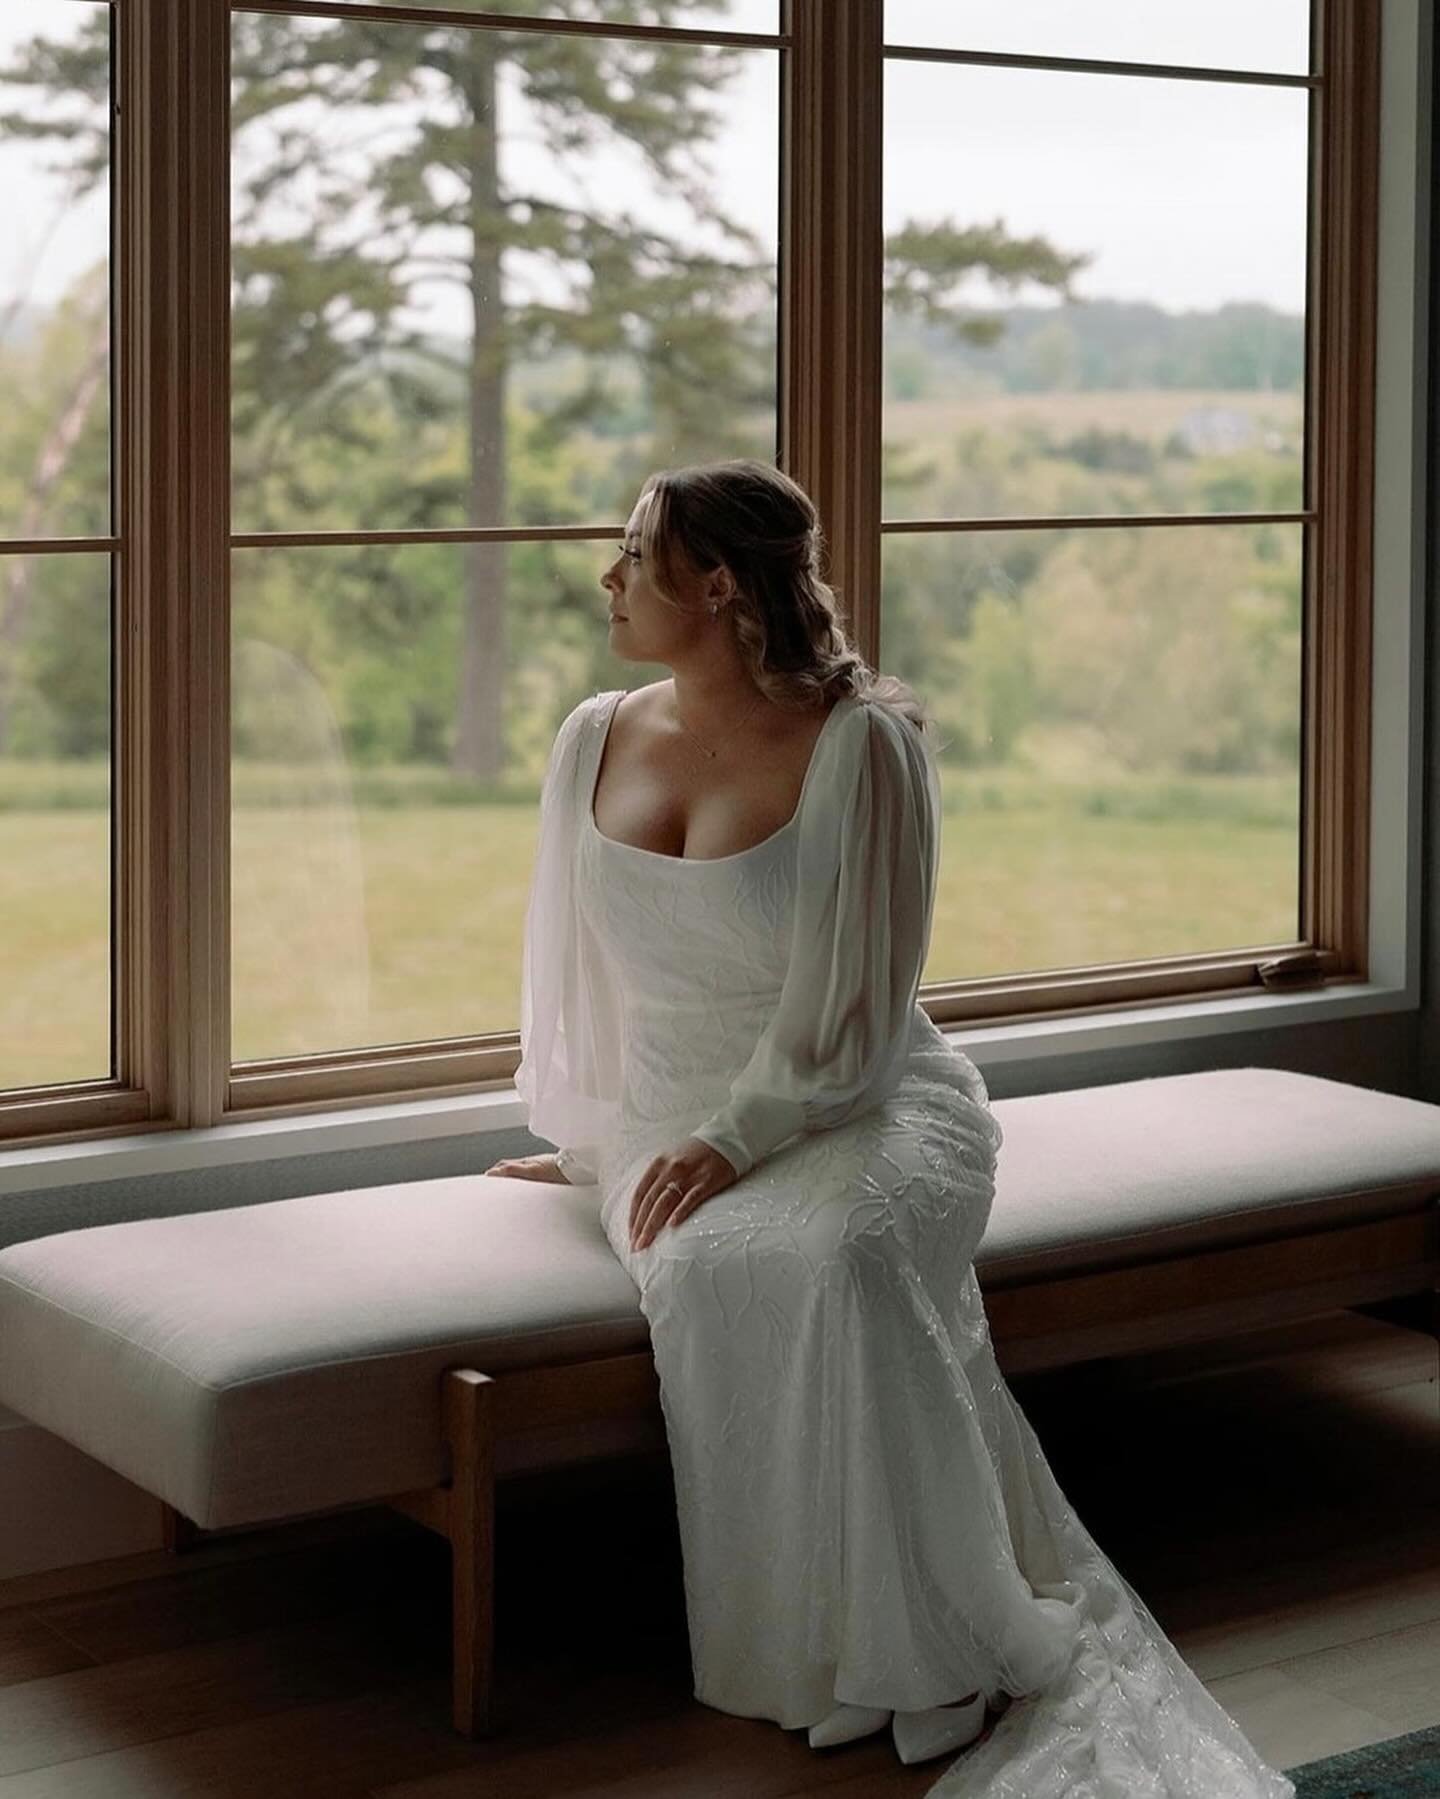 Details from #AGbride Katie&rsquo;s day 💫
#agAspen paired with our Colette Sleeves
⠀⠀⠀⠀⠀⠀⠀⠀⠀
photo: @katemelconian 
video: @amandamonroefinn 
stockist: @lovelybridedc @lovelybride 
alterations: @thegildedthimble 
beauty: @shannonbutlermakeup @_hair_